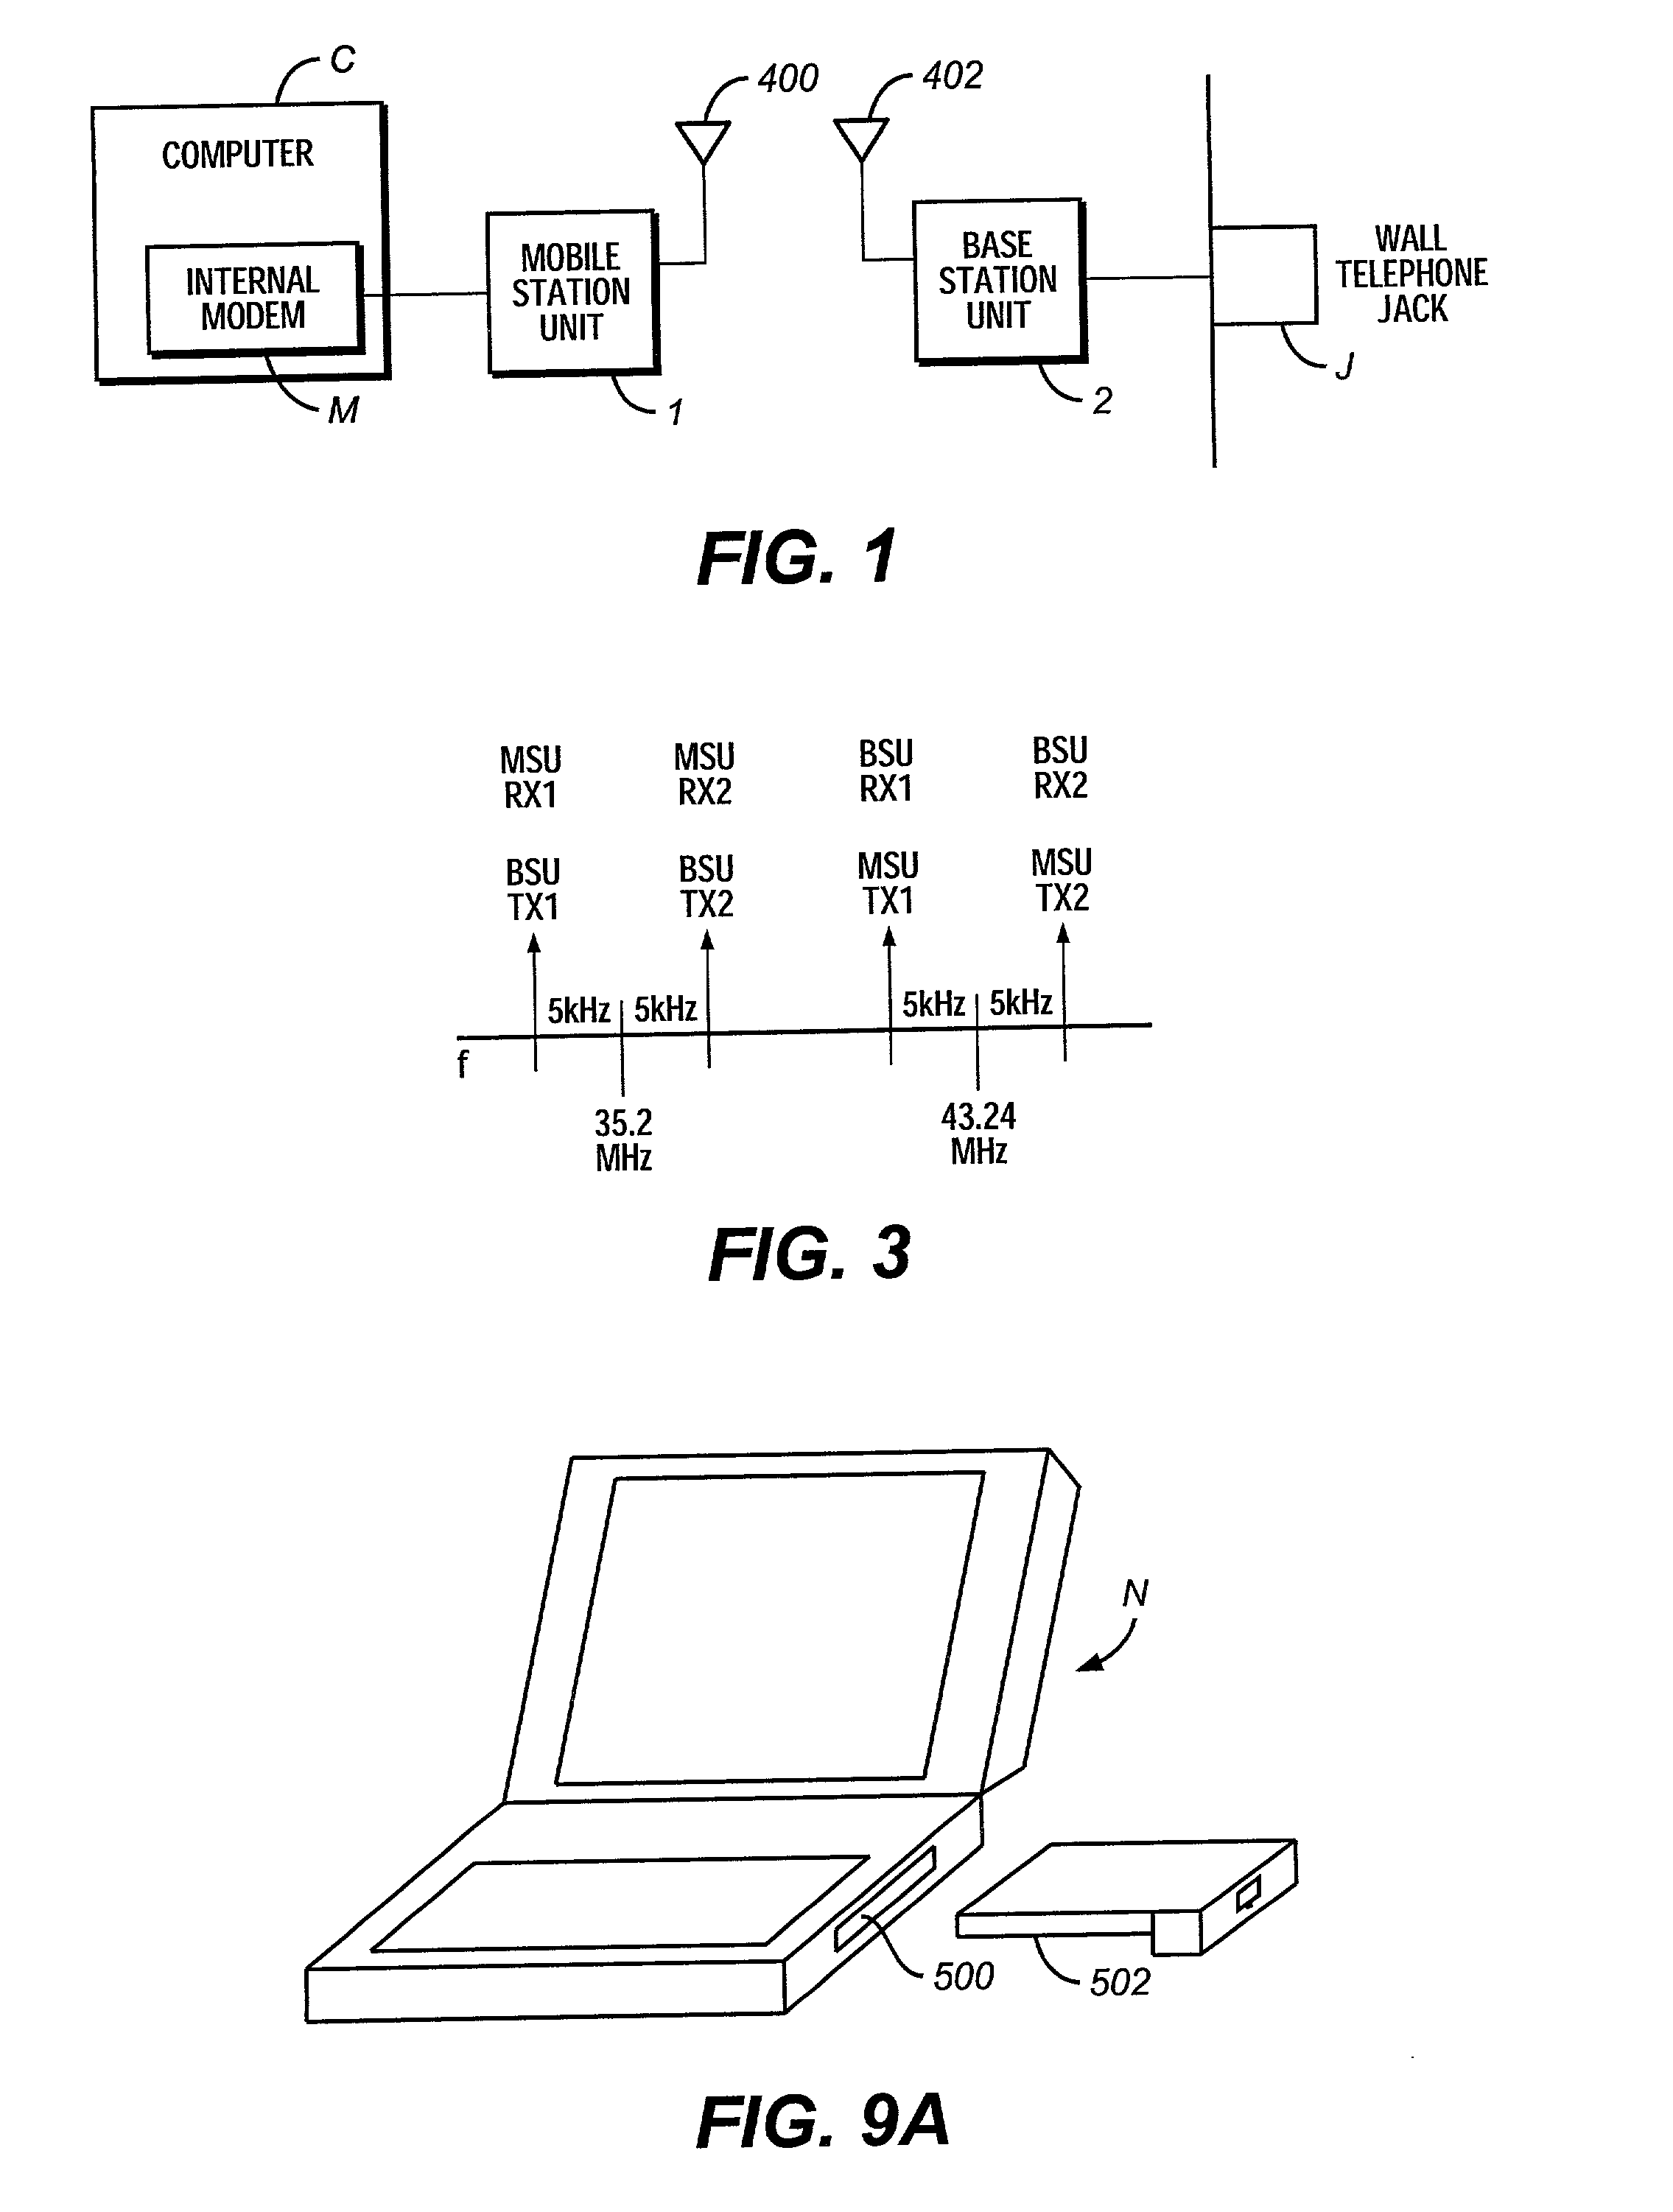 Cordless modem system having multiple base and remote stations which are interusable and secure